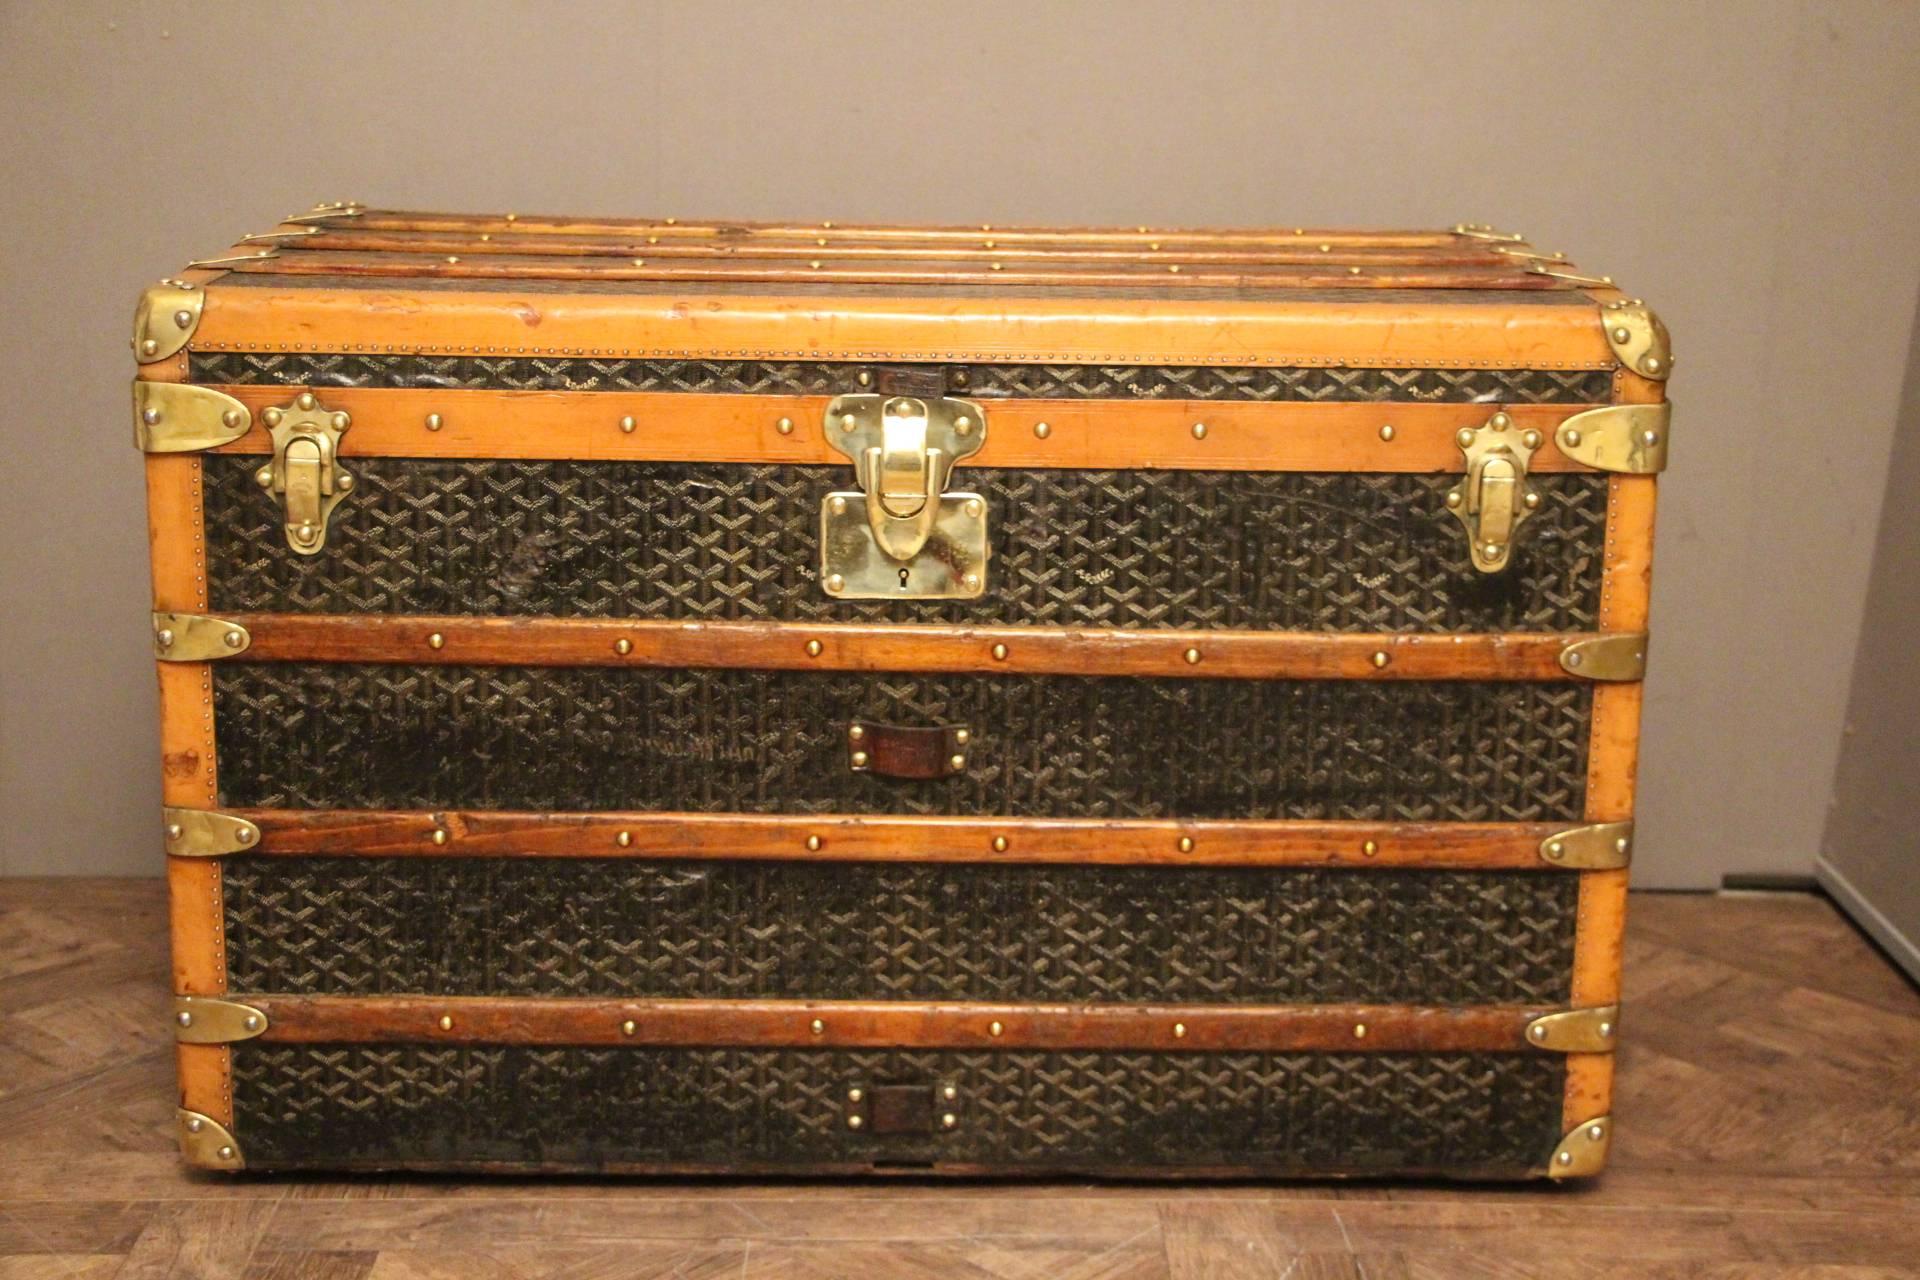 This Aine Goyard trunk has got very nice and unusual proportions as well as a beautiful, warm patina.
It features its famous and sought after chevron canvas, its original brass stamped lock, brass stamped clasps ,brass stamped handles and light